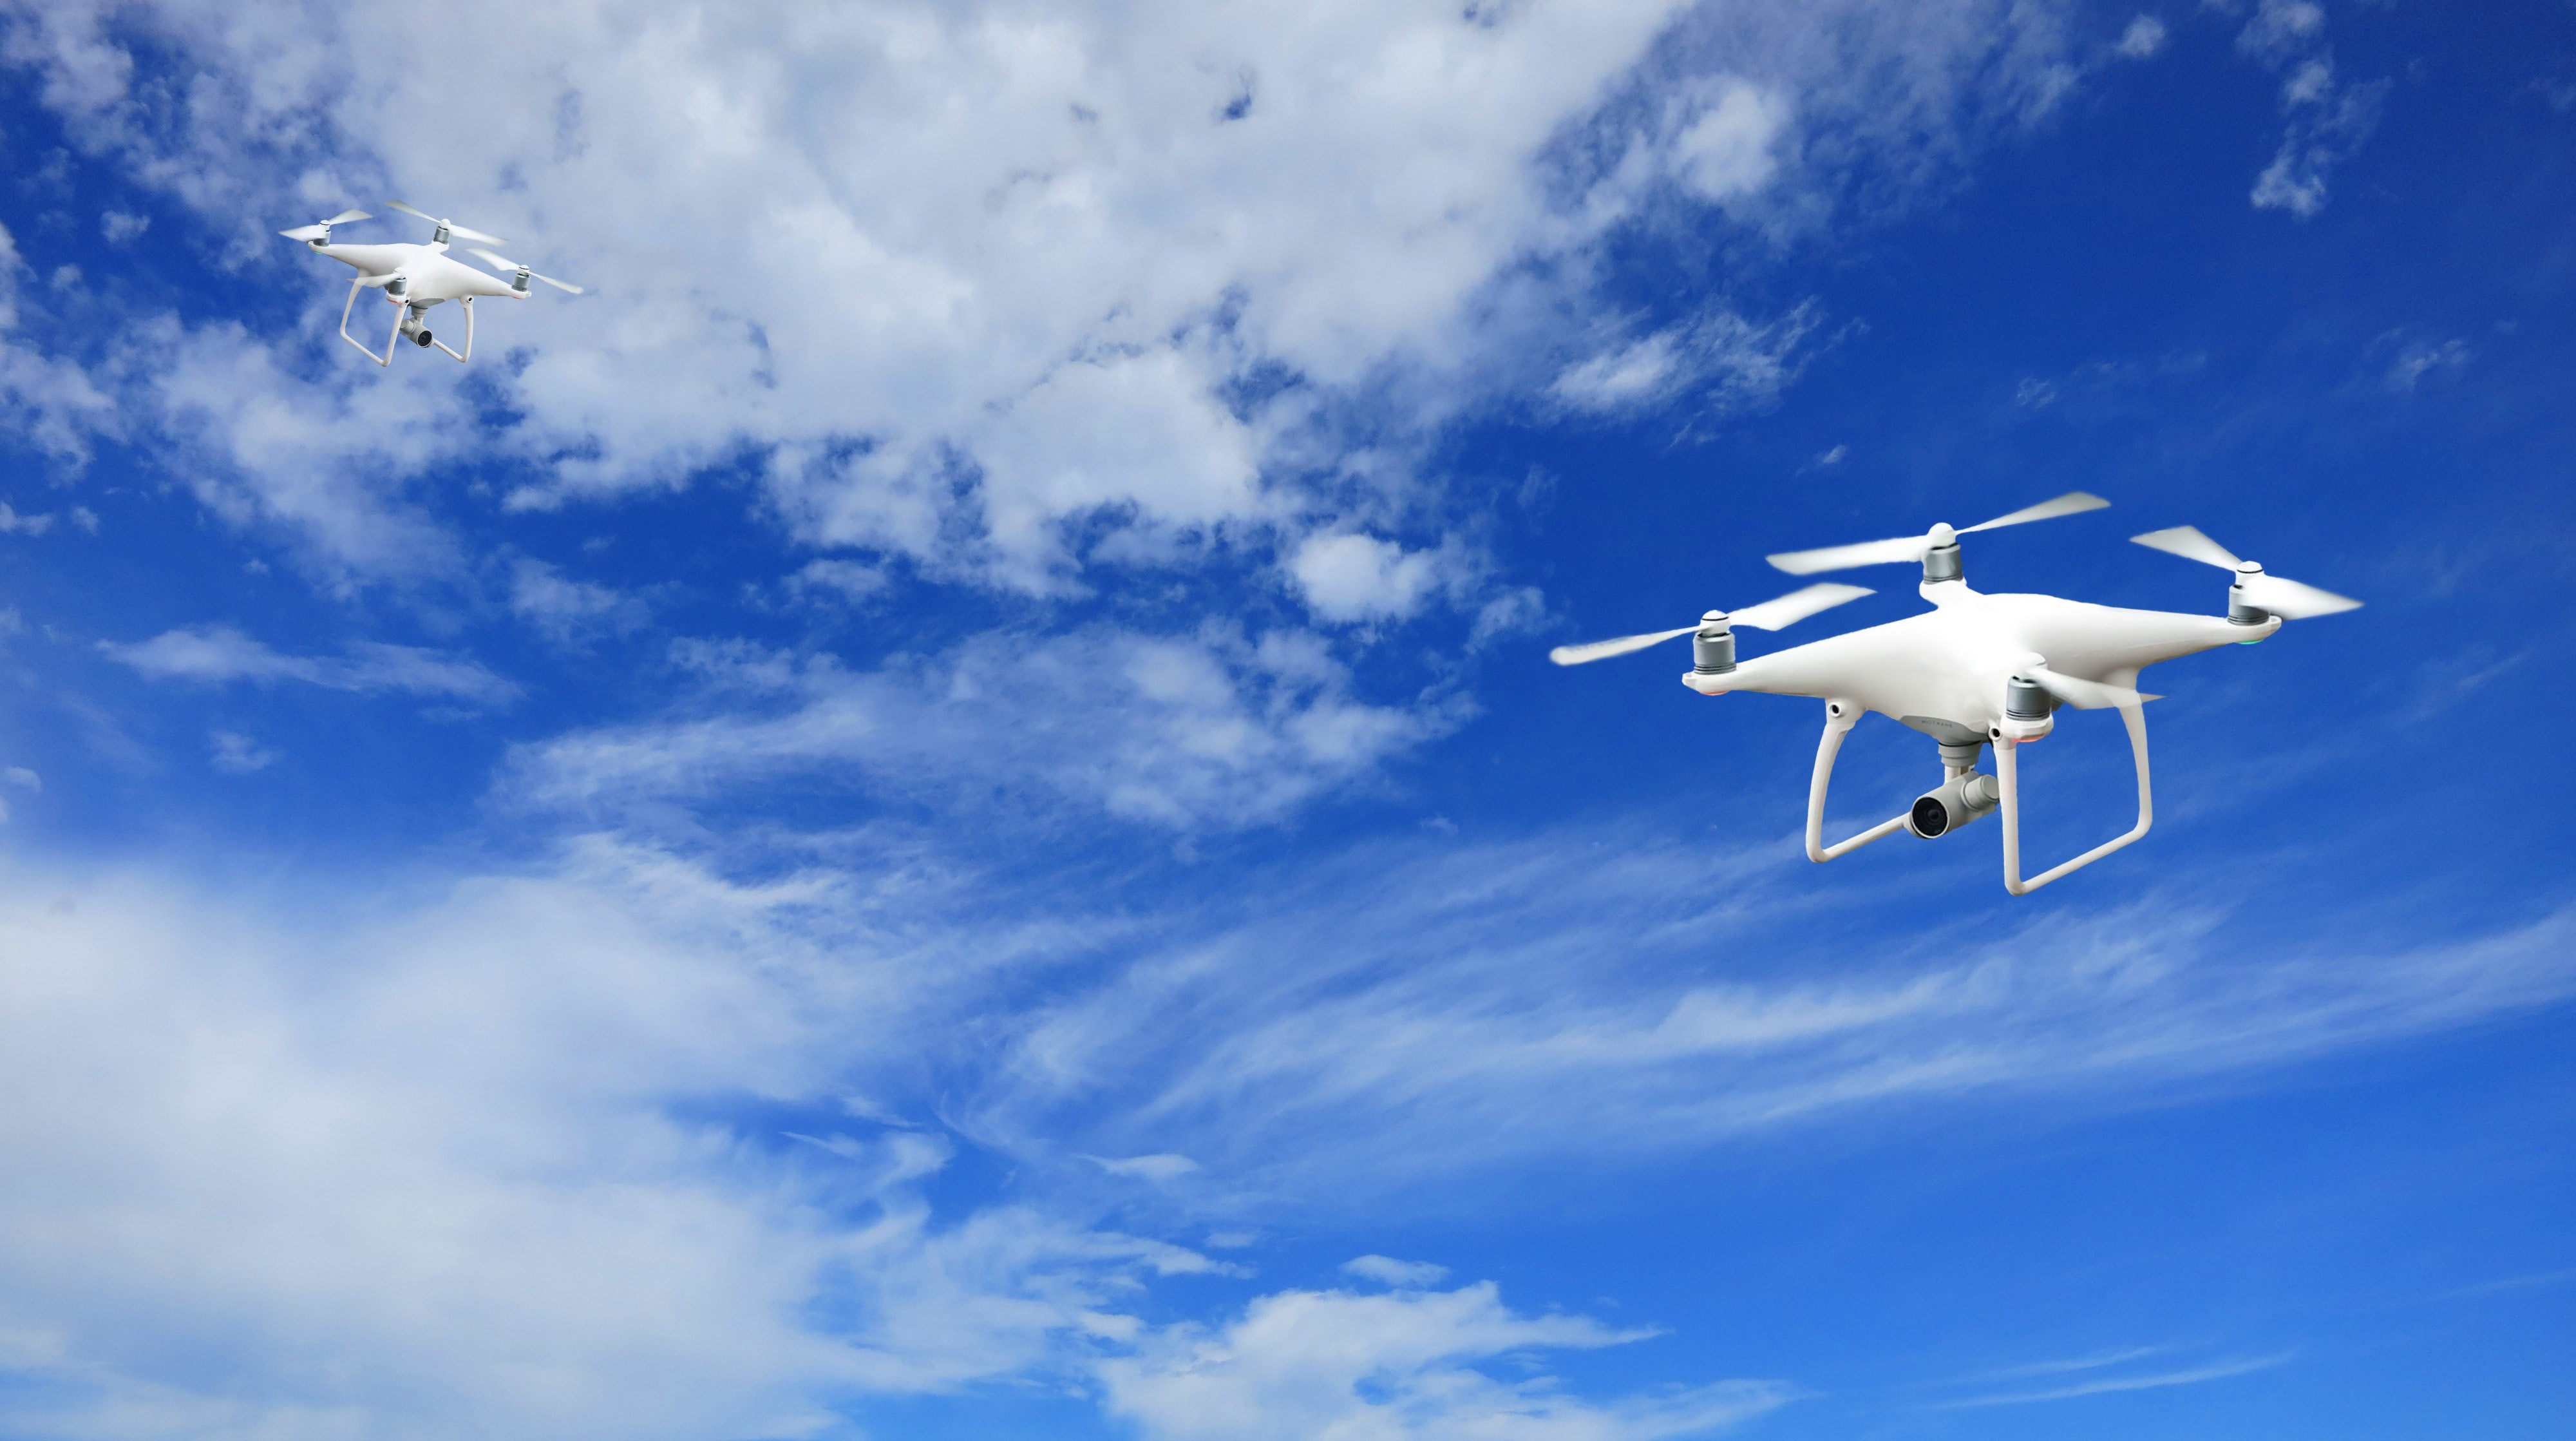 DHS Awards $750K to Texas Small Business for Urban Detection and Identification of Small Unmanned Aerial Vehicles